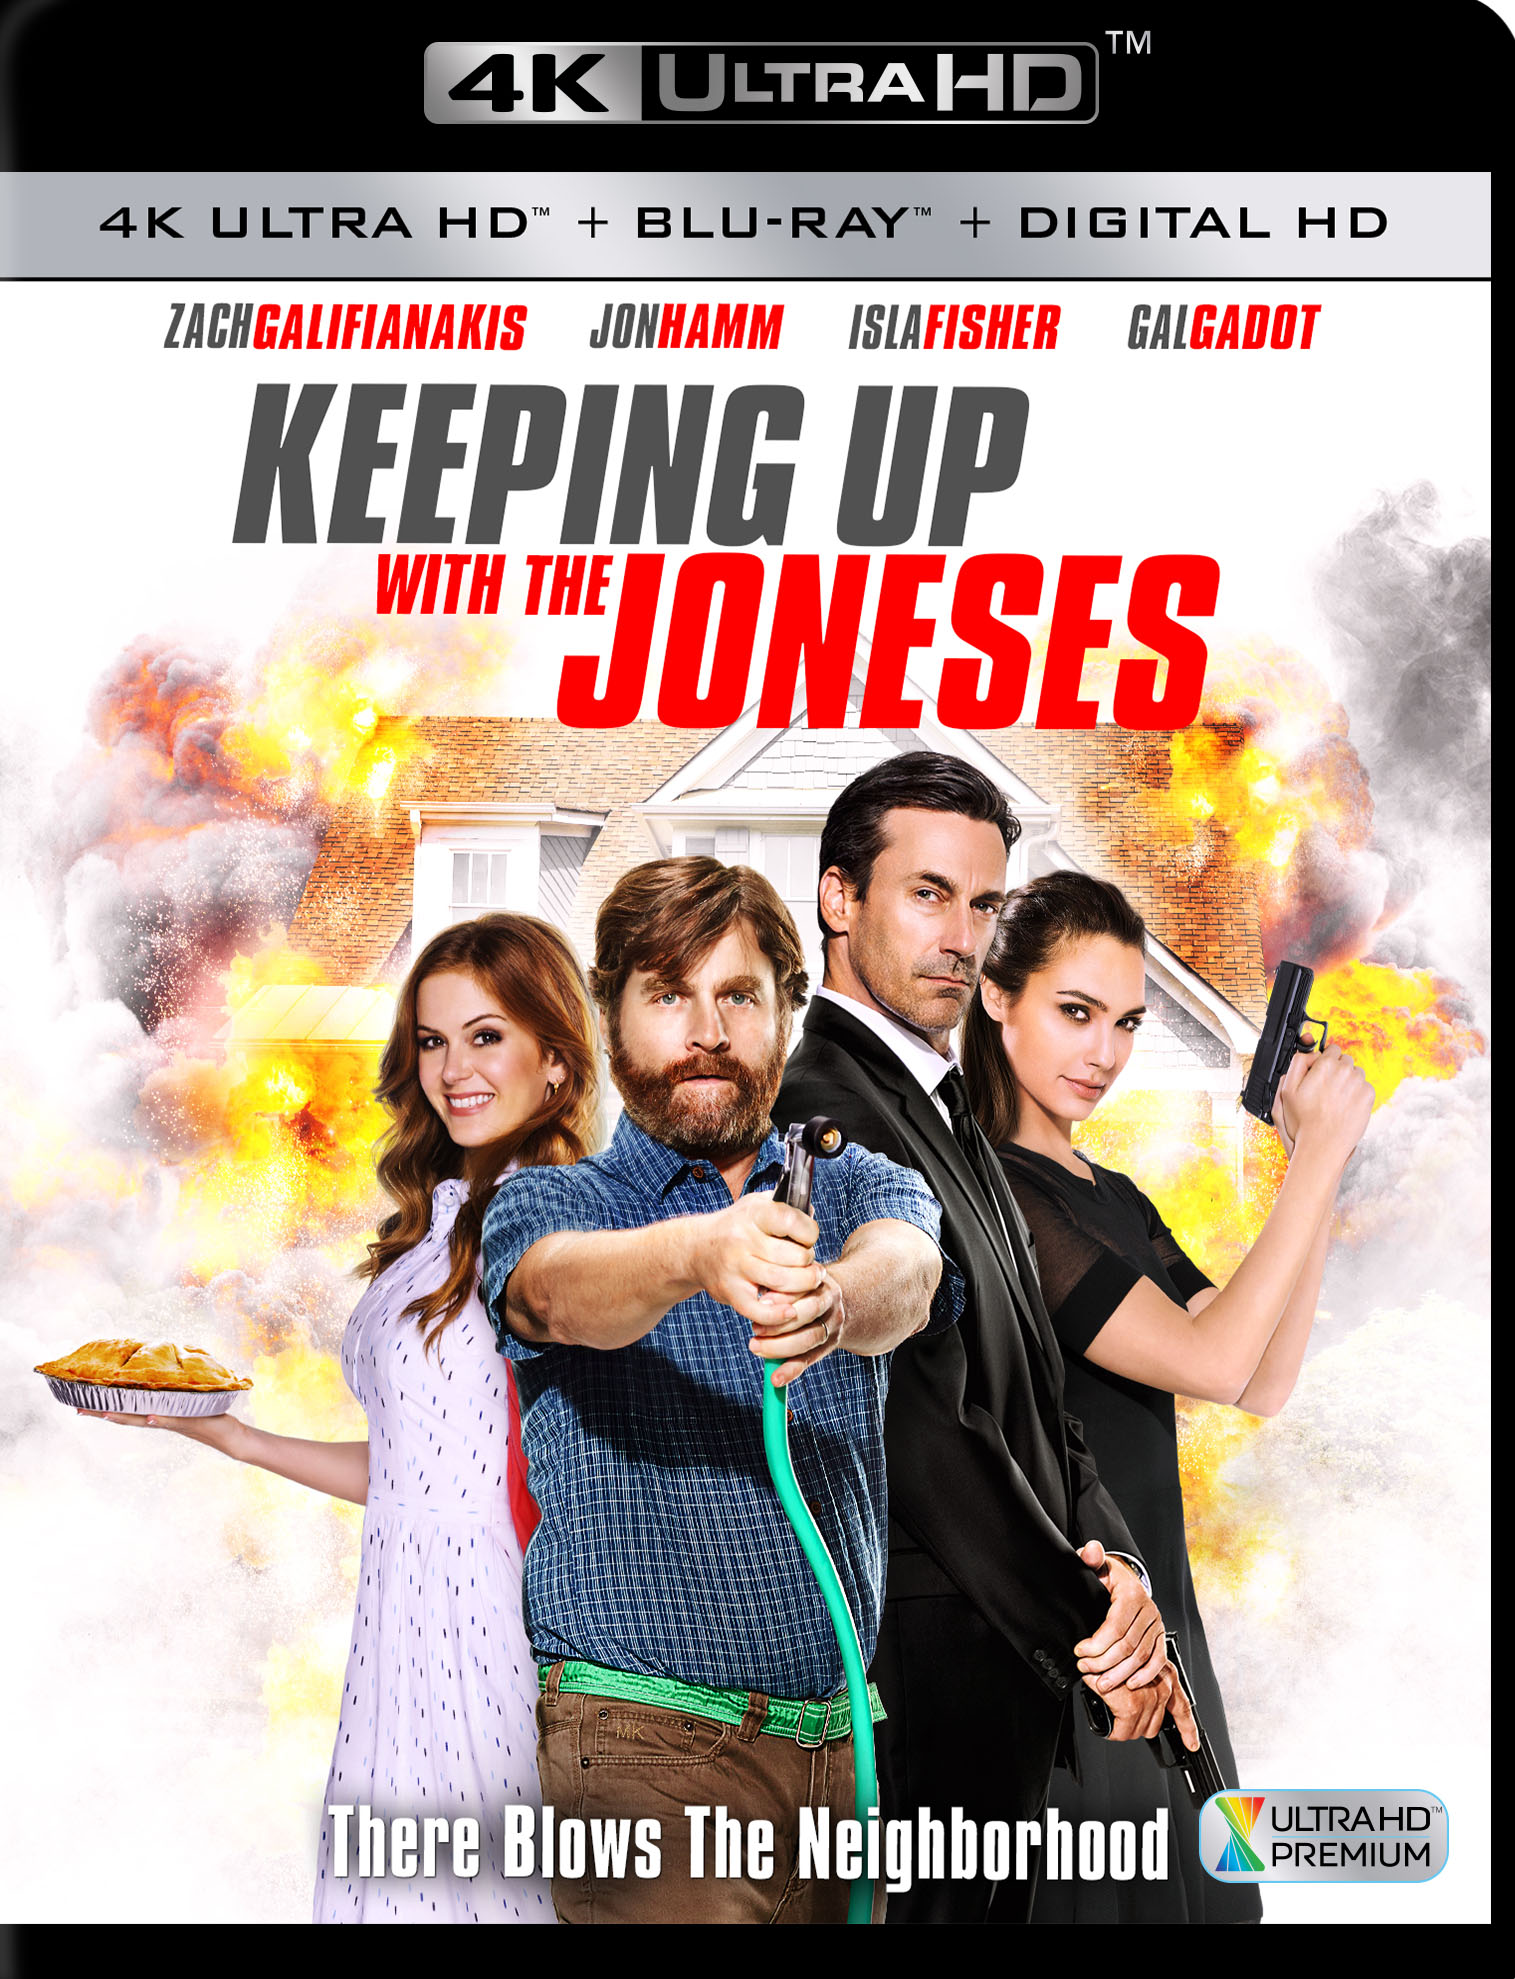 Keeping up with the Joneses